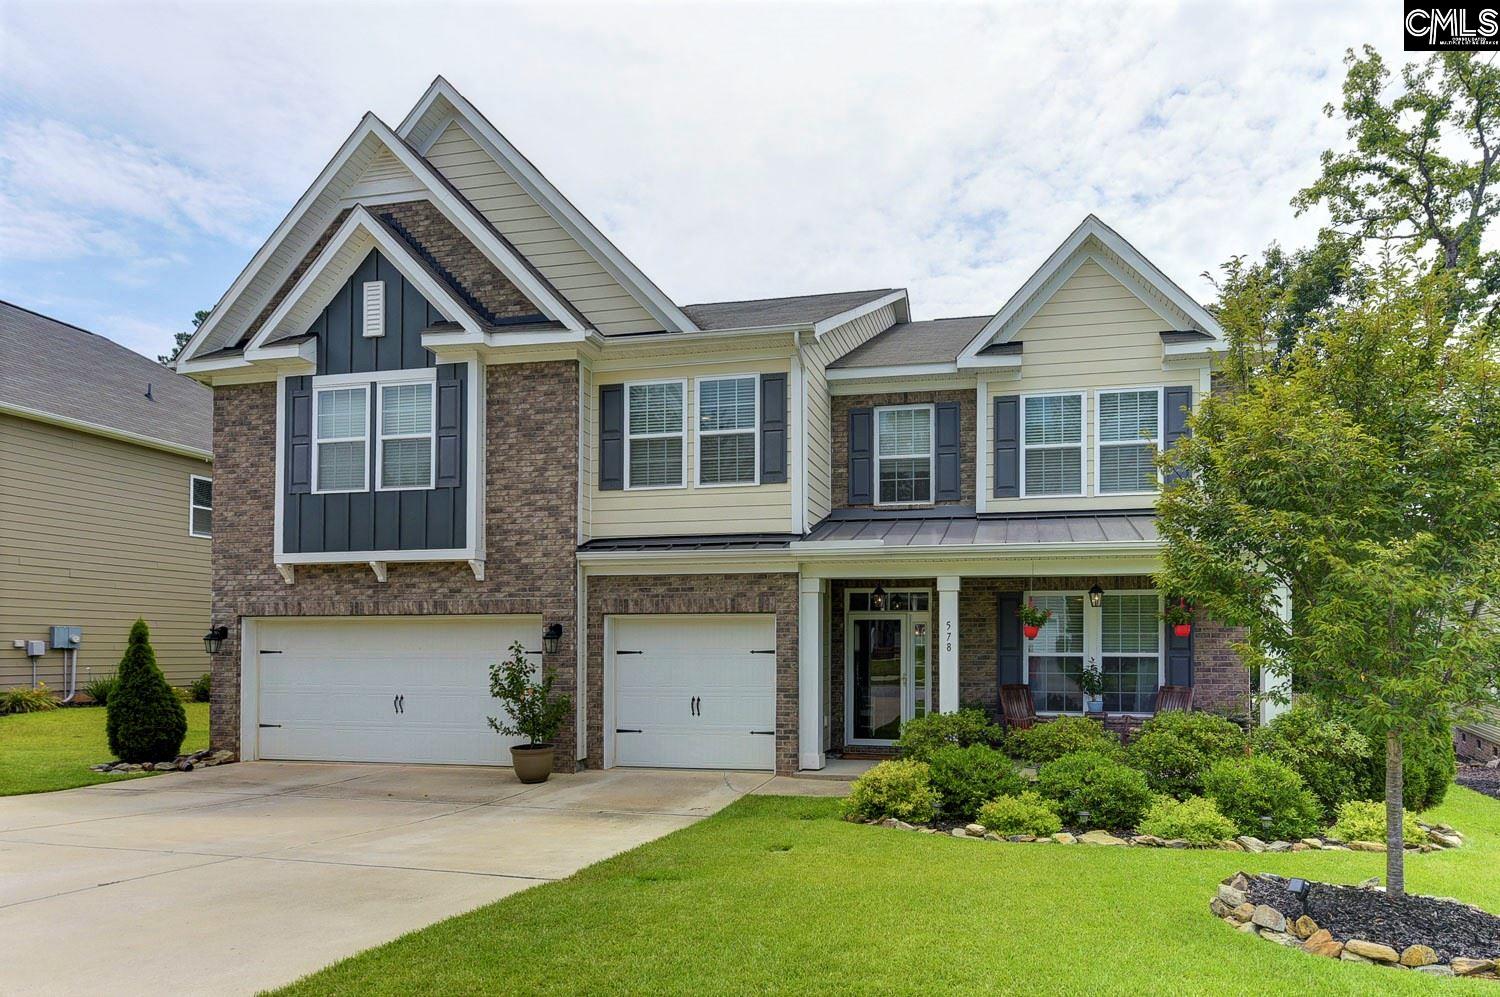 578 Eagles Rest Chapin, SC 29036